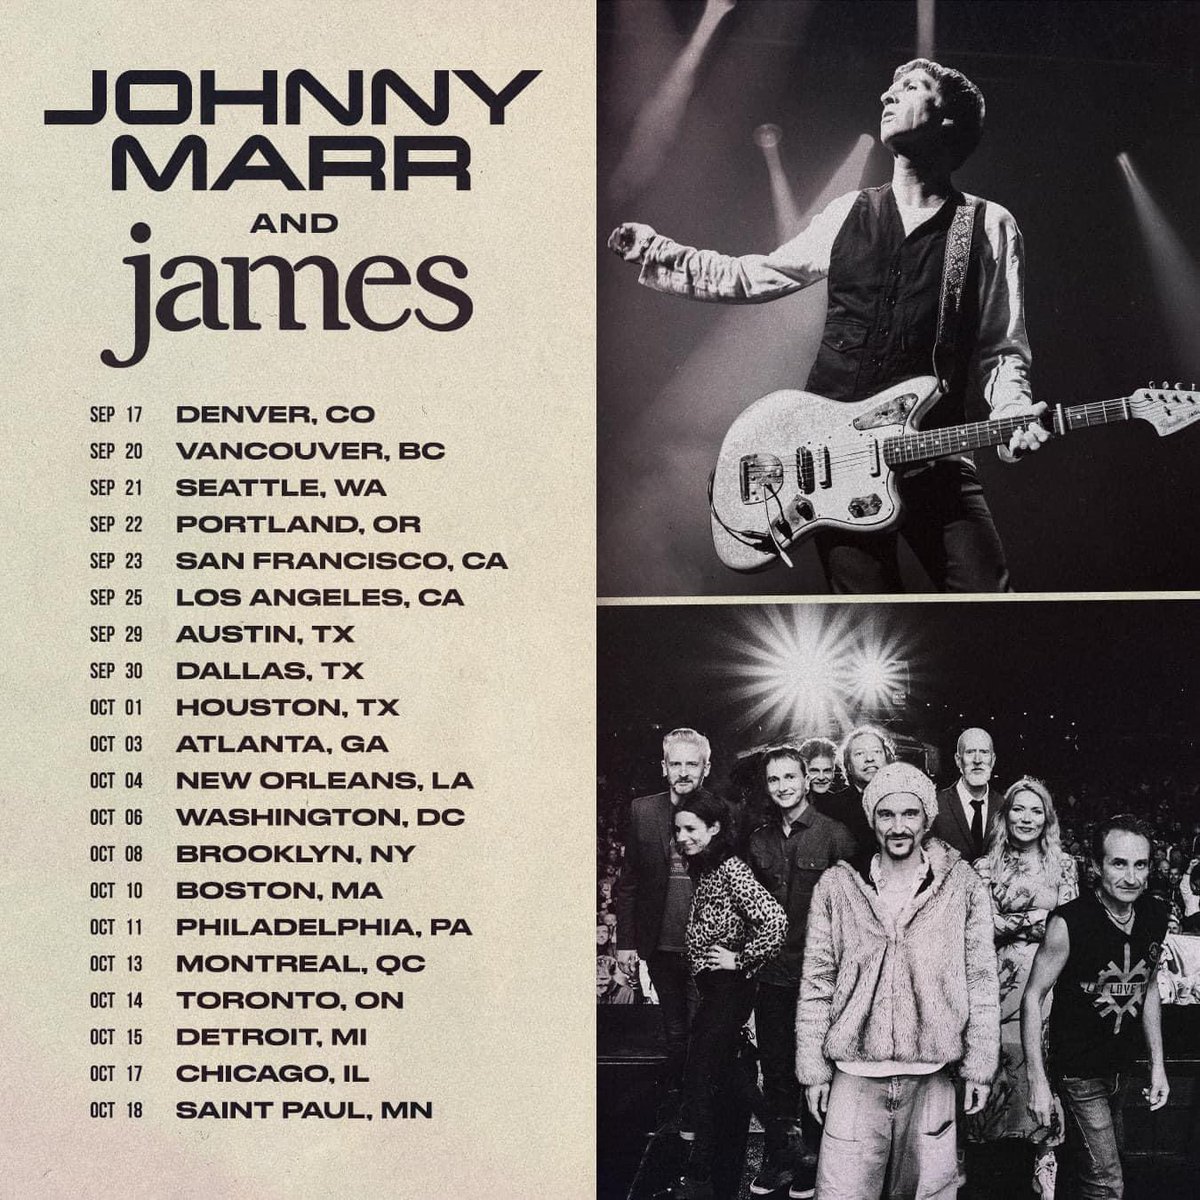 Johnny Marr and James have announced a North American Tour for this September and October.